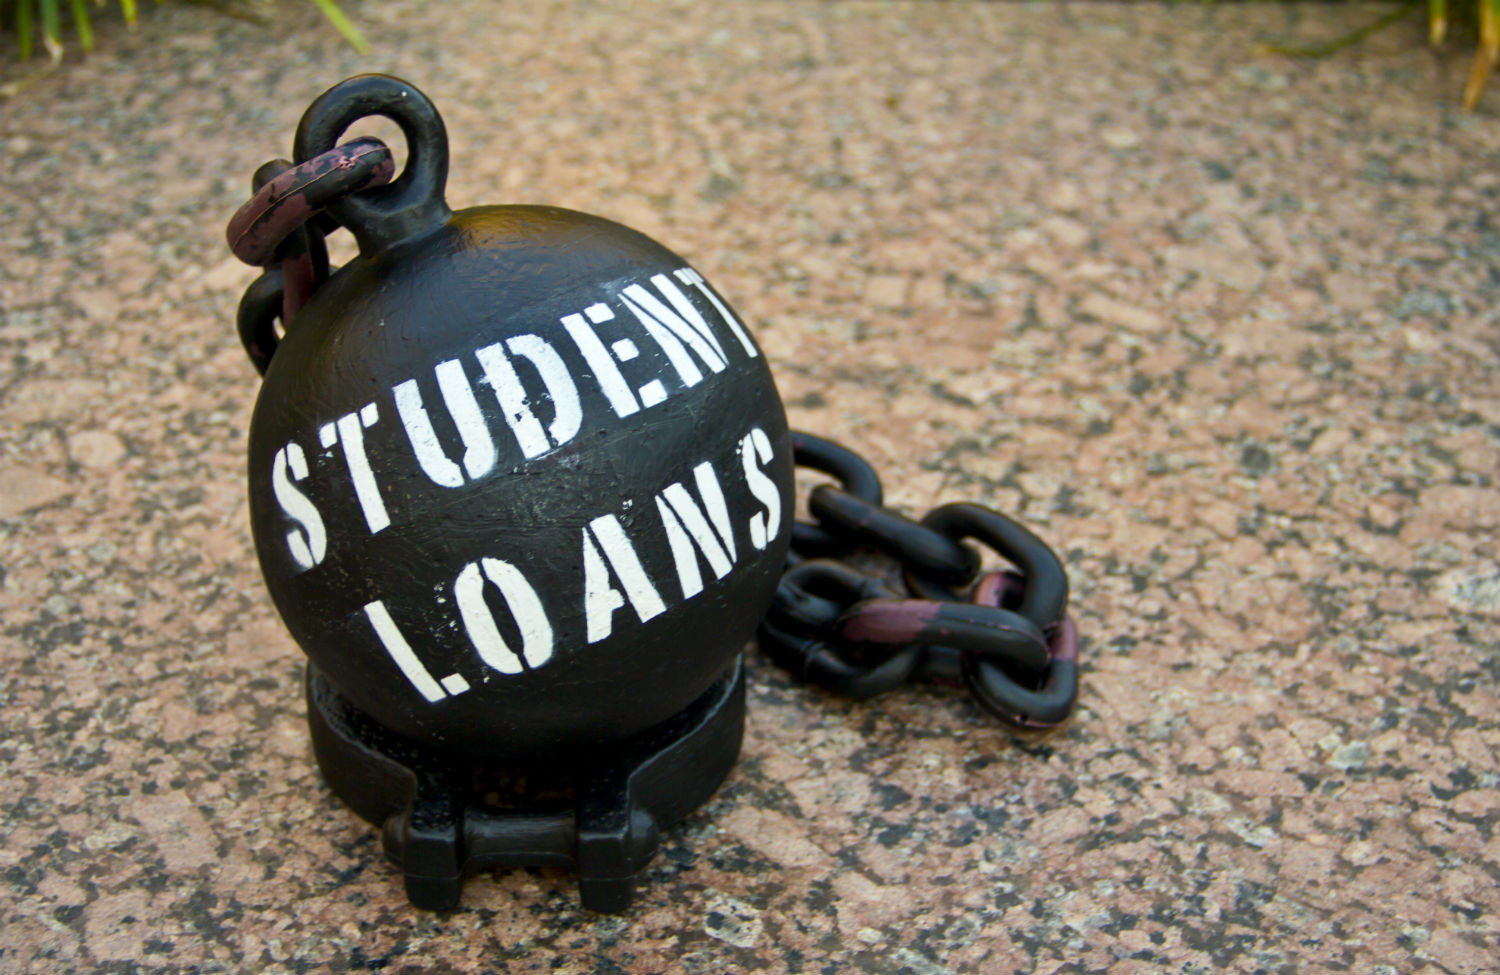 If You Owe Student-Loan Debt, the Government Can Garnish Your Social Security Benefits